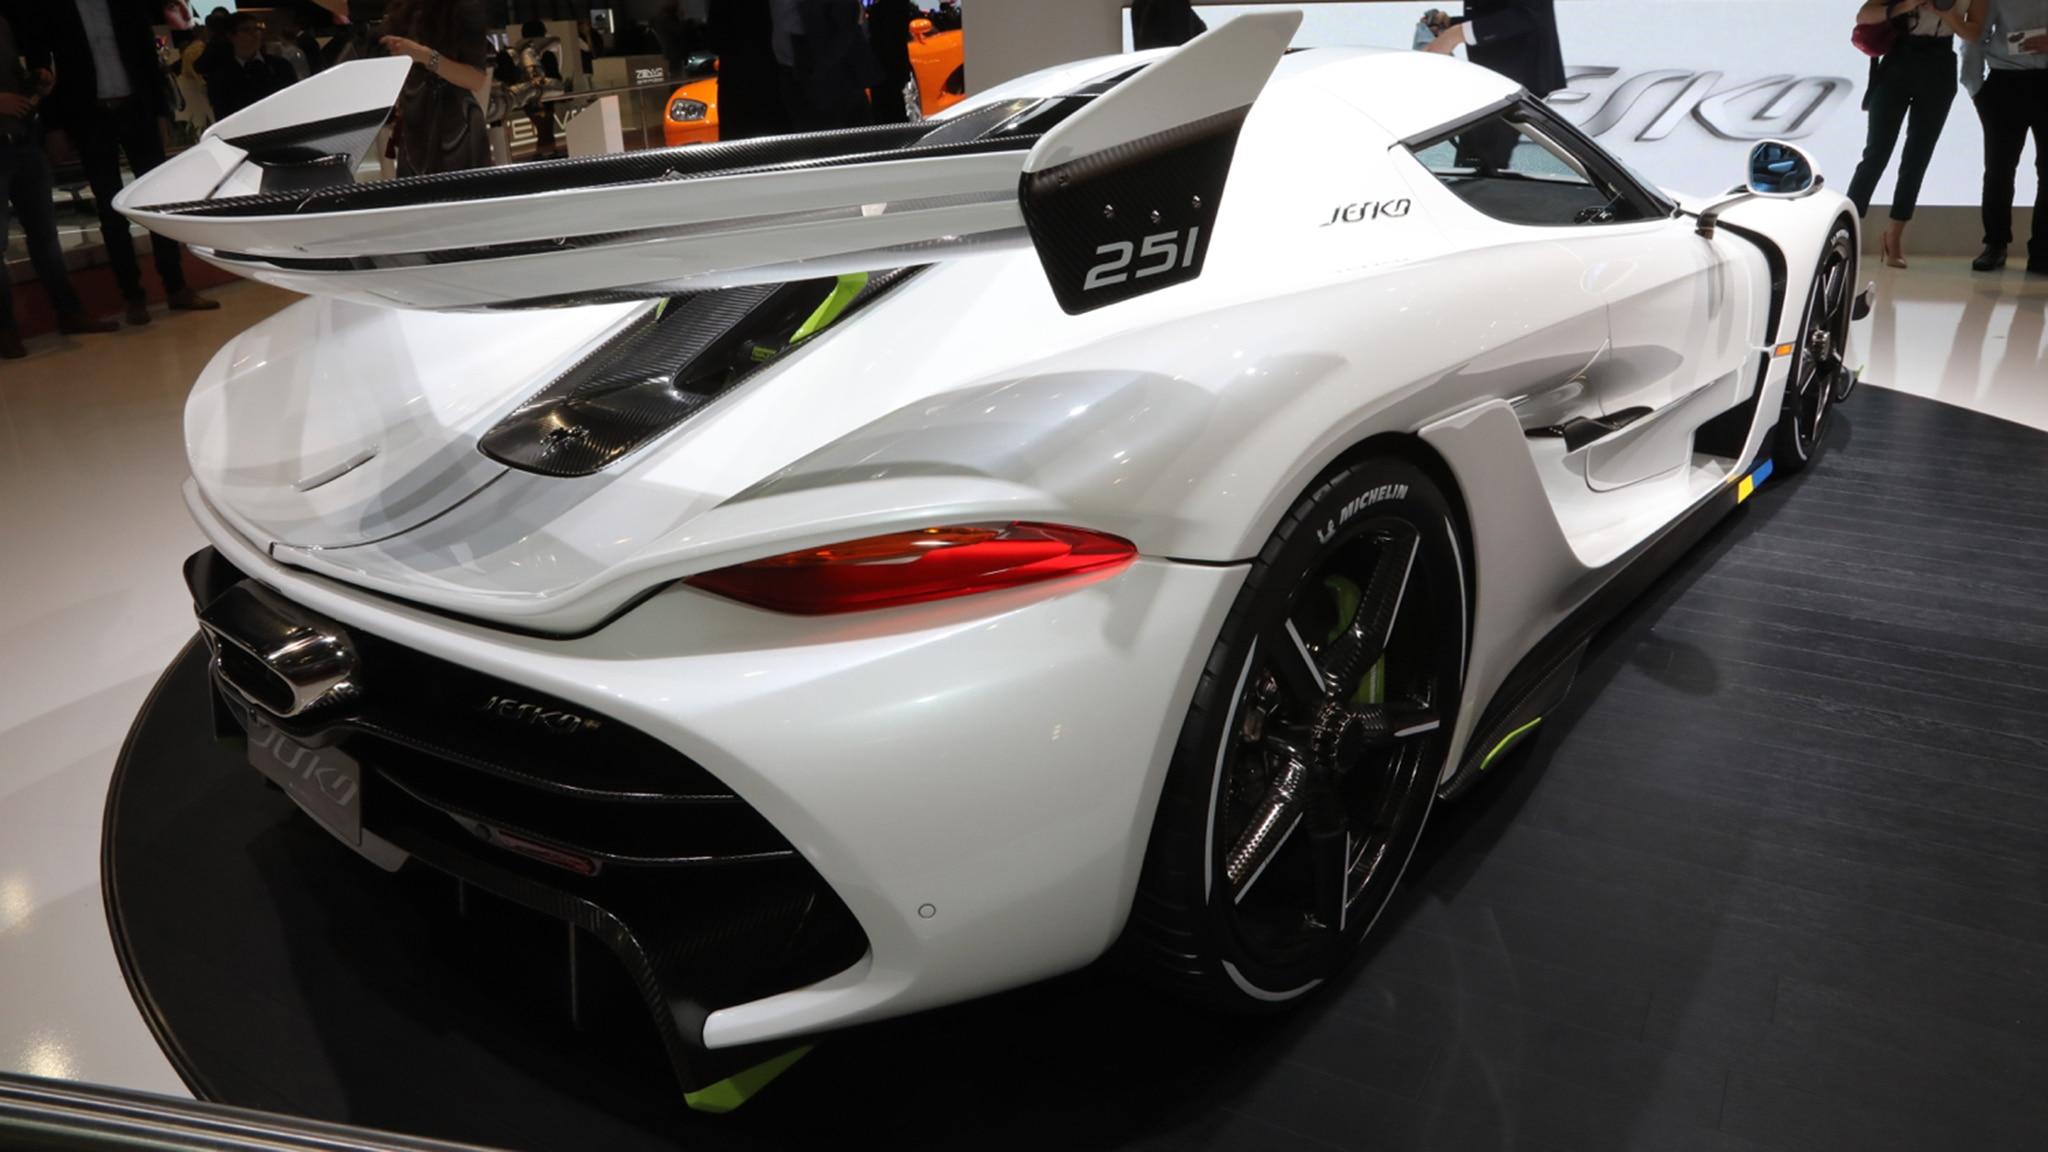 The 600 HP Koenigsegg Jesko Has One Of The Craziest Gearboxes Ever